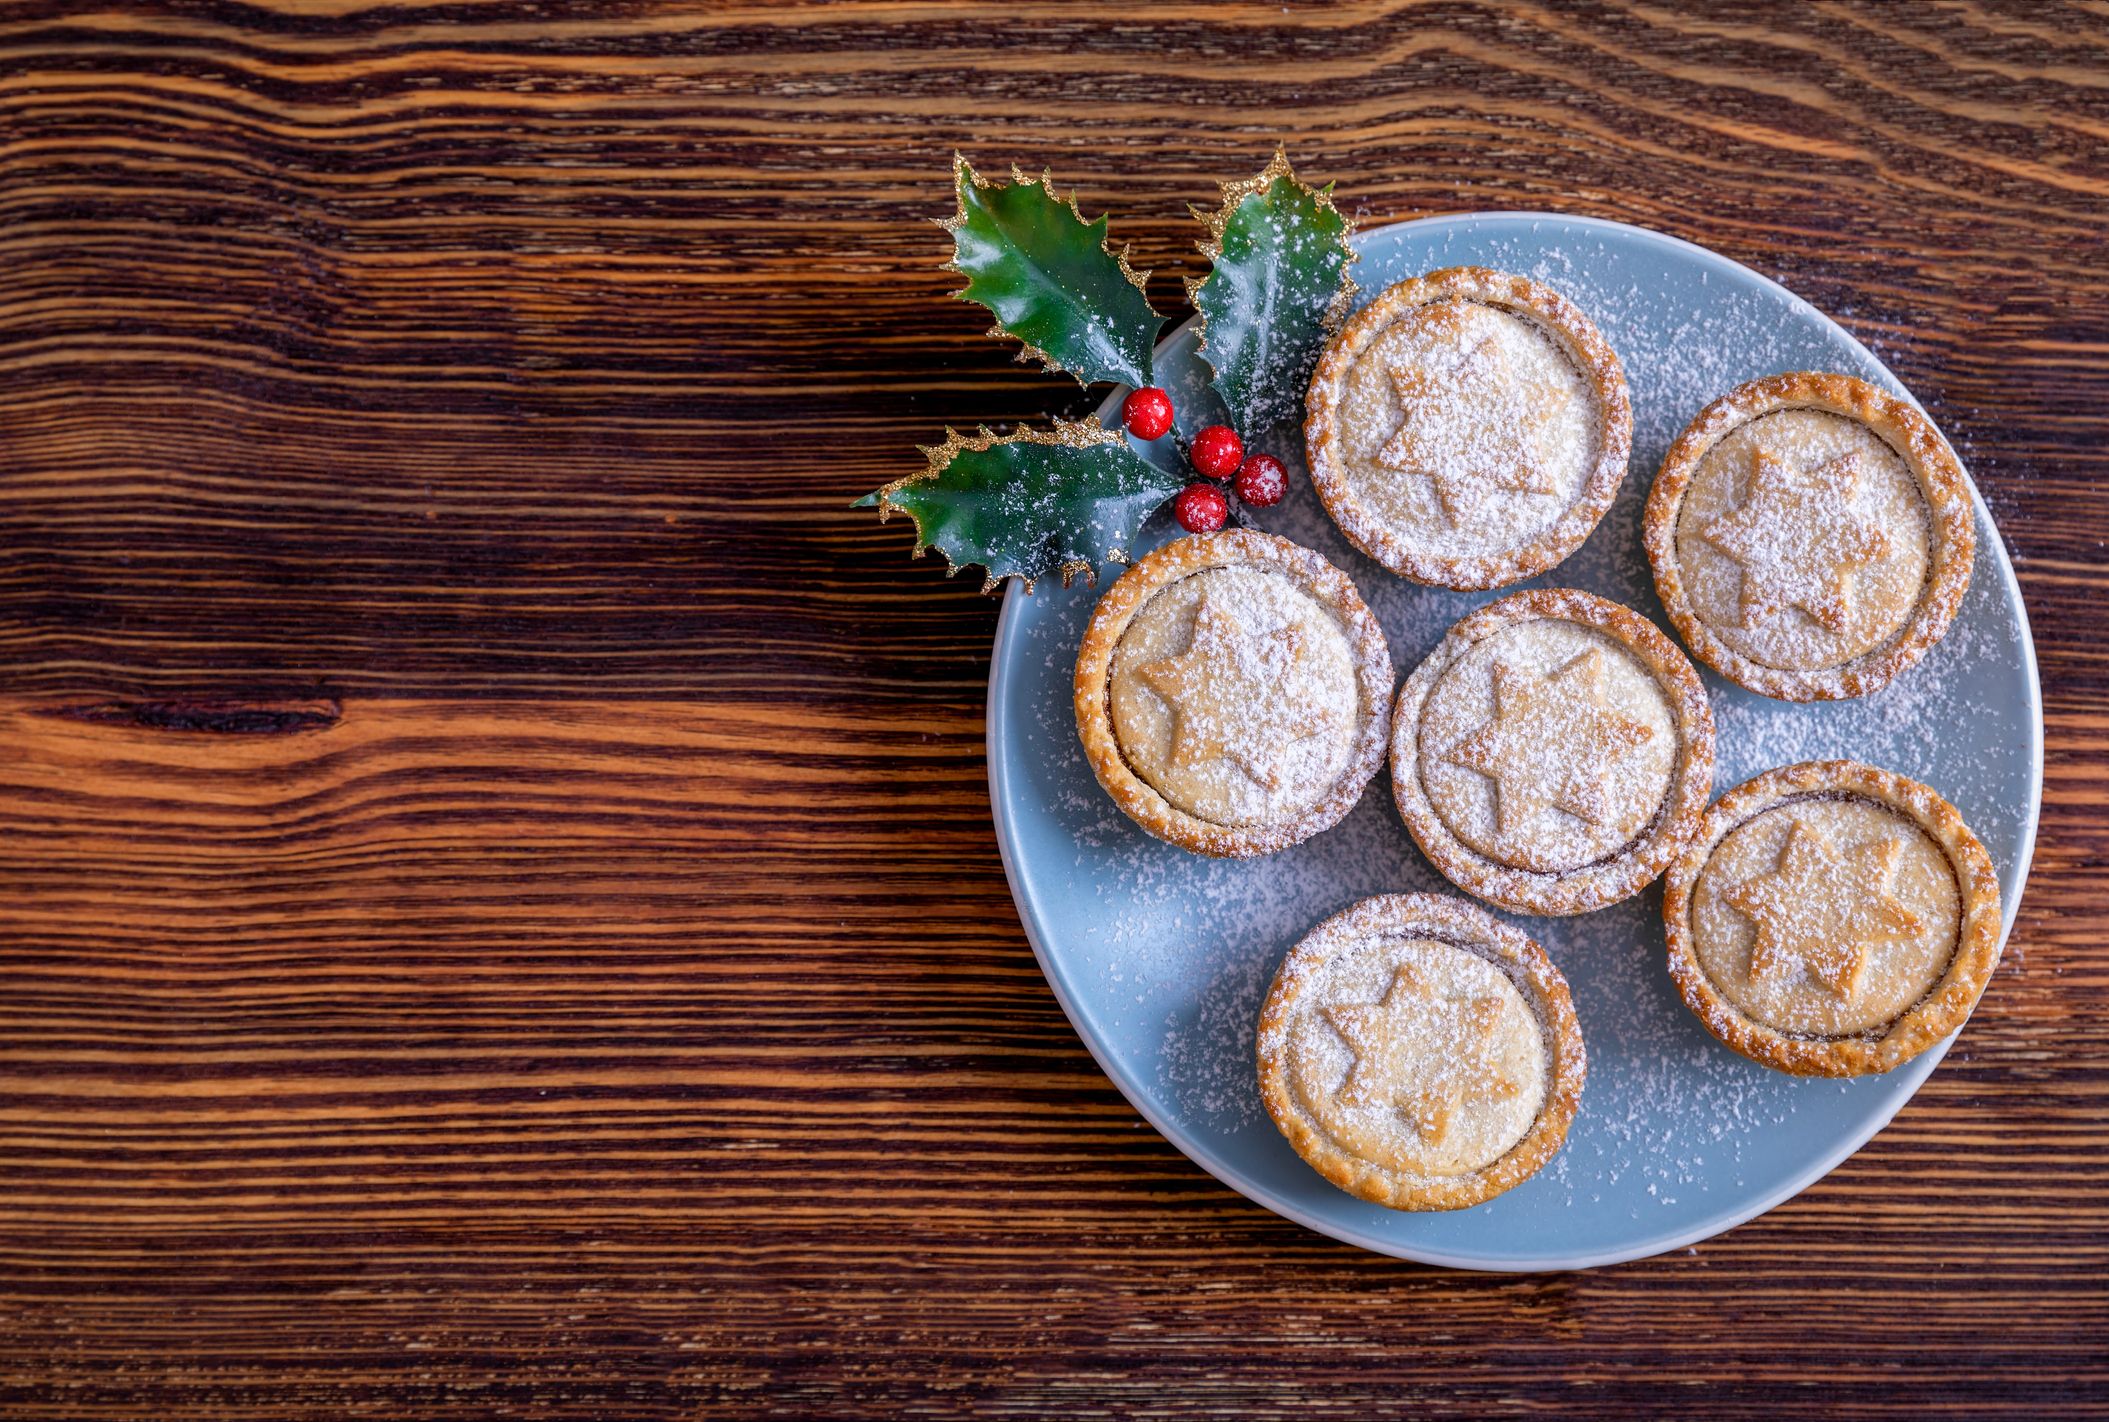 Best Alternative Mince Pies For